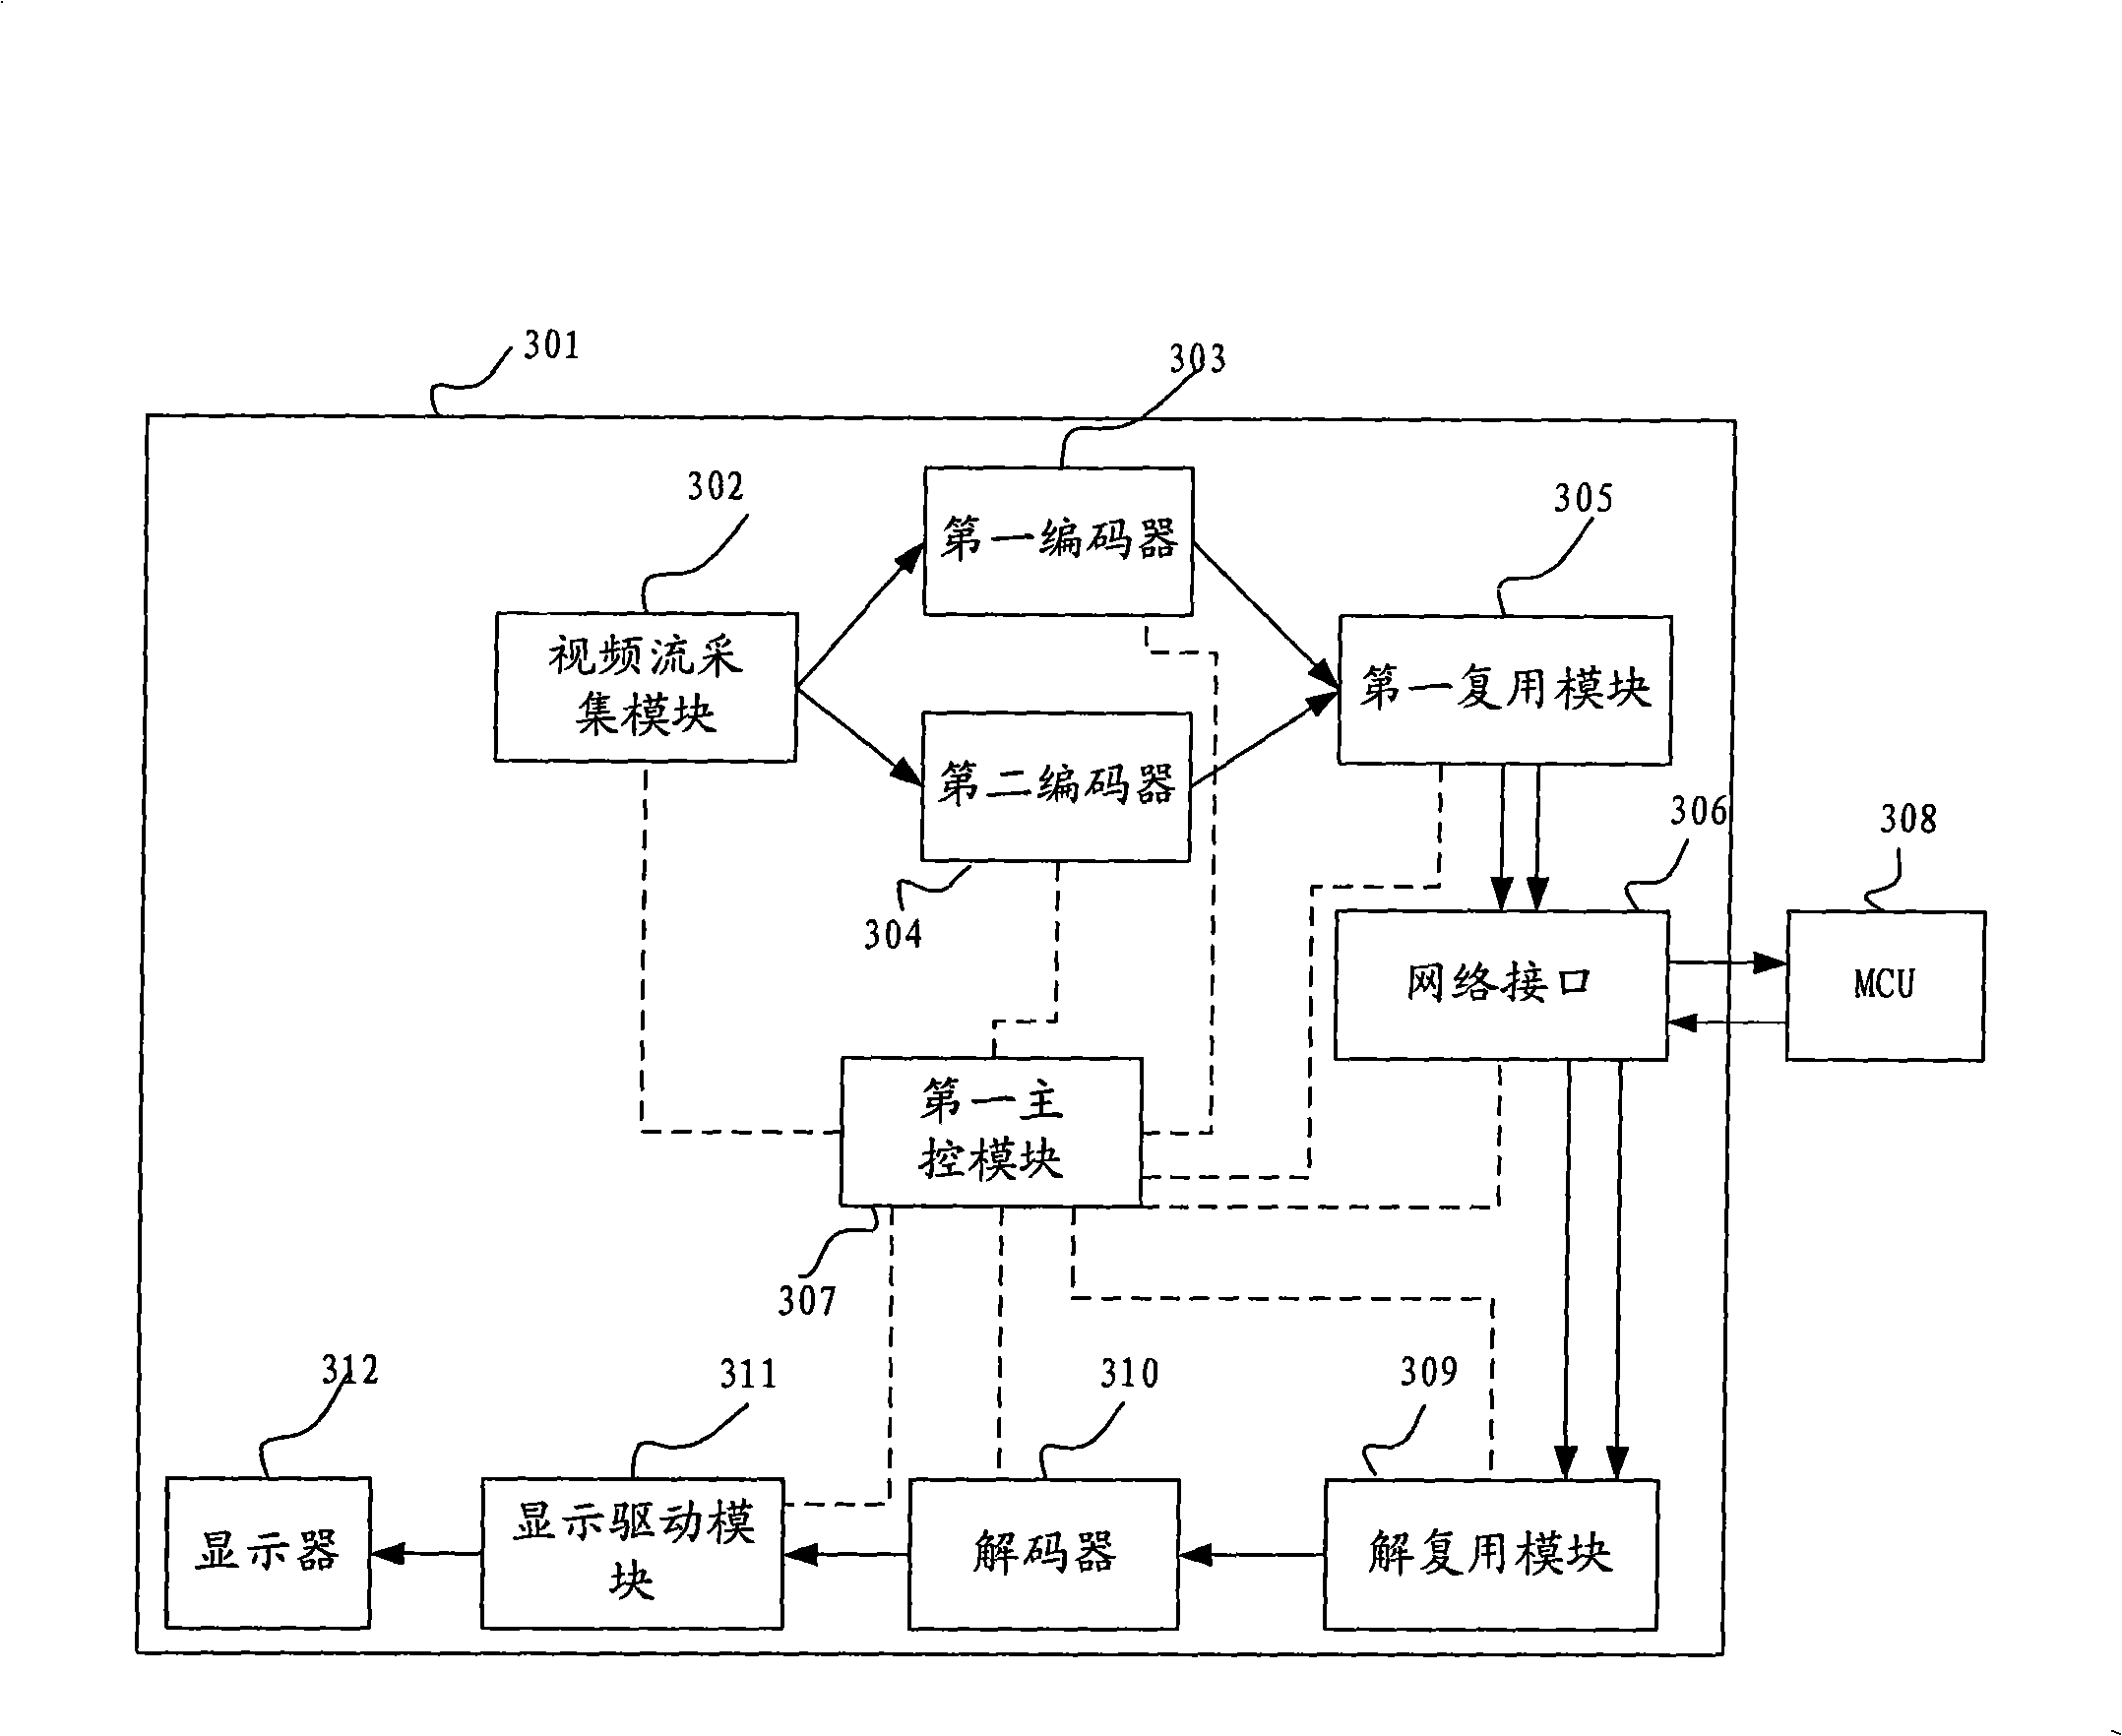 Multiple-picture processing system and method for video conference